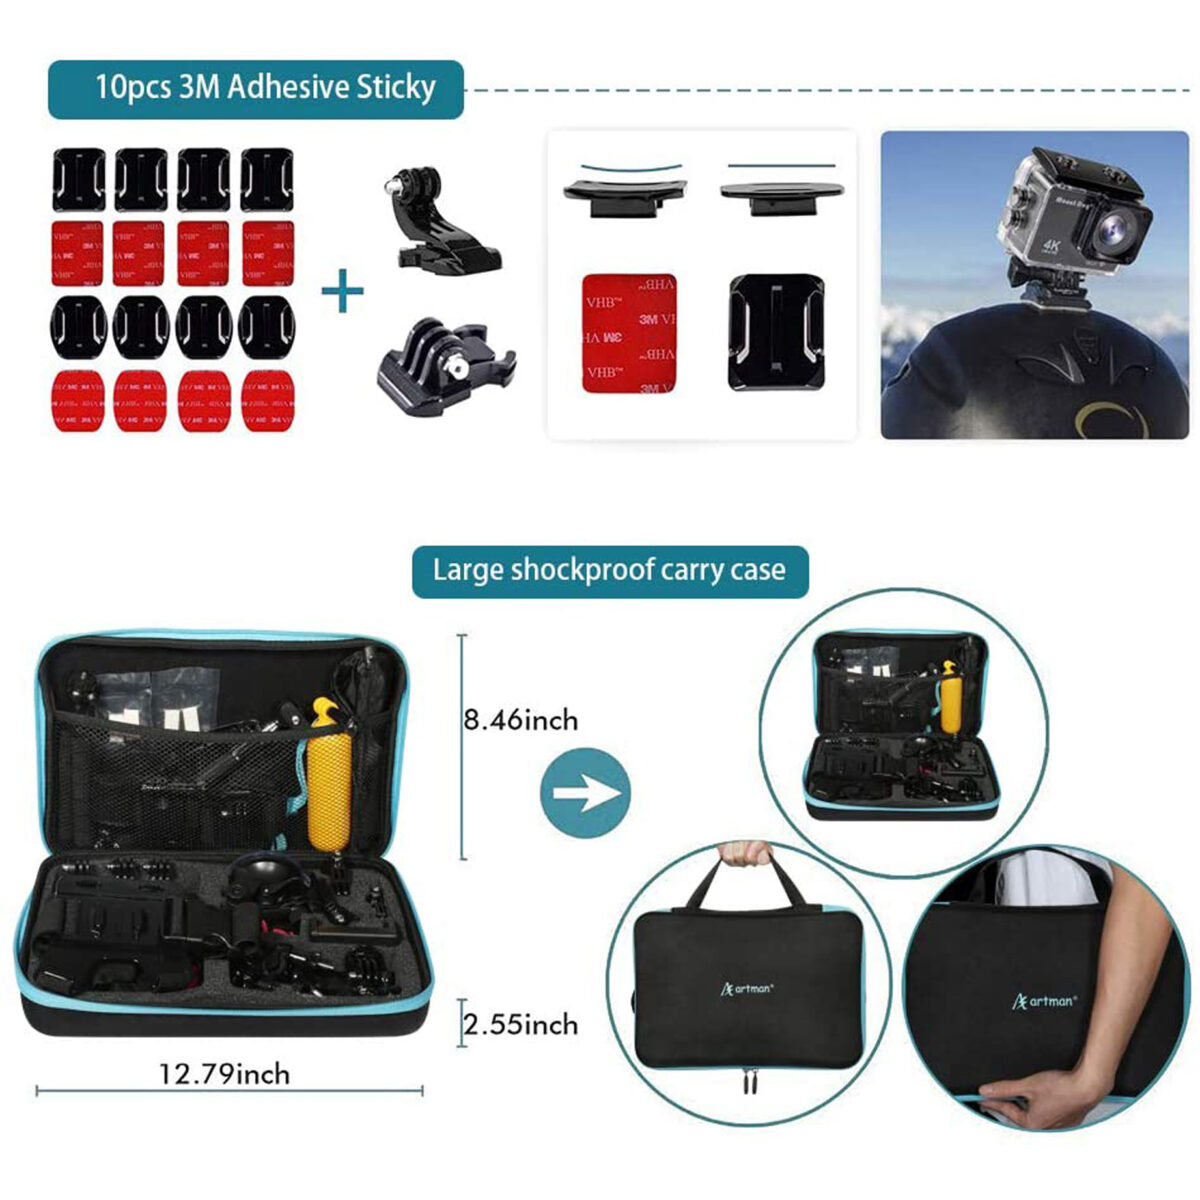 Artman 58 Pcs Action Camera Accessories Kit Compatible with GoPro Hero 3